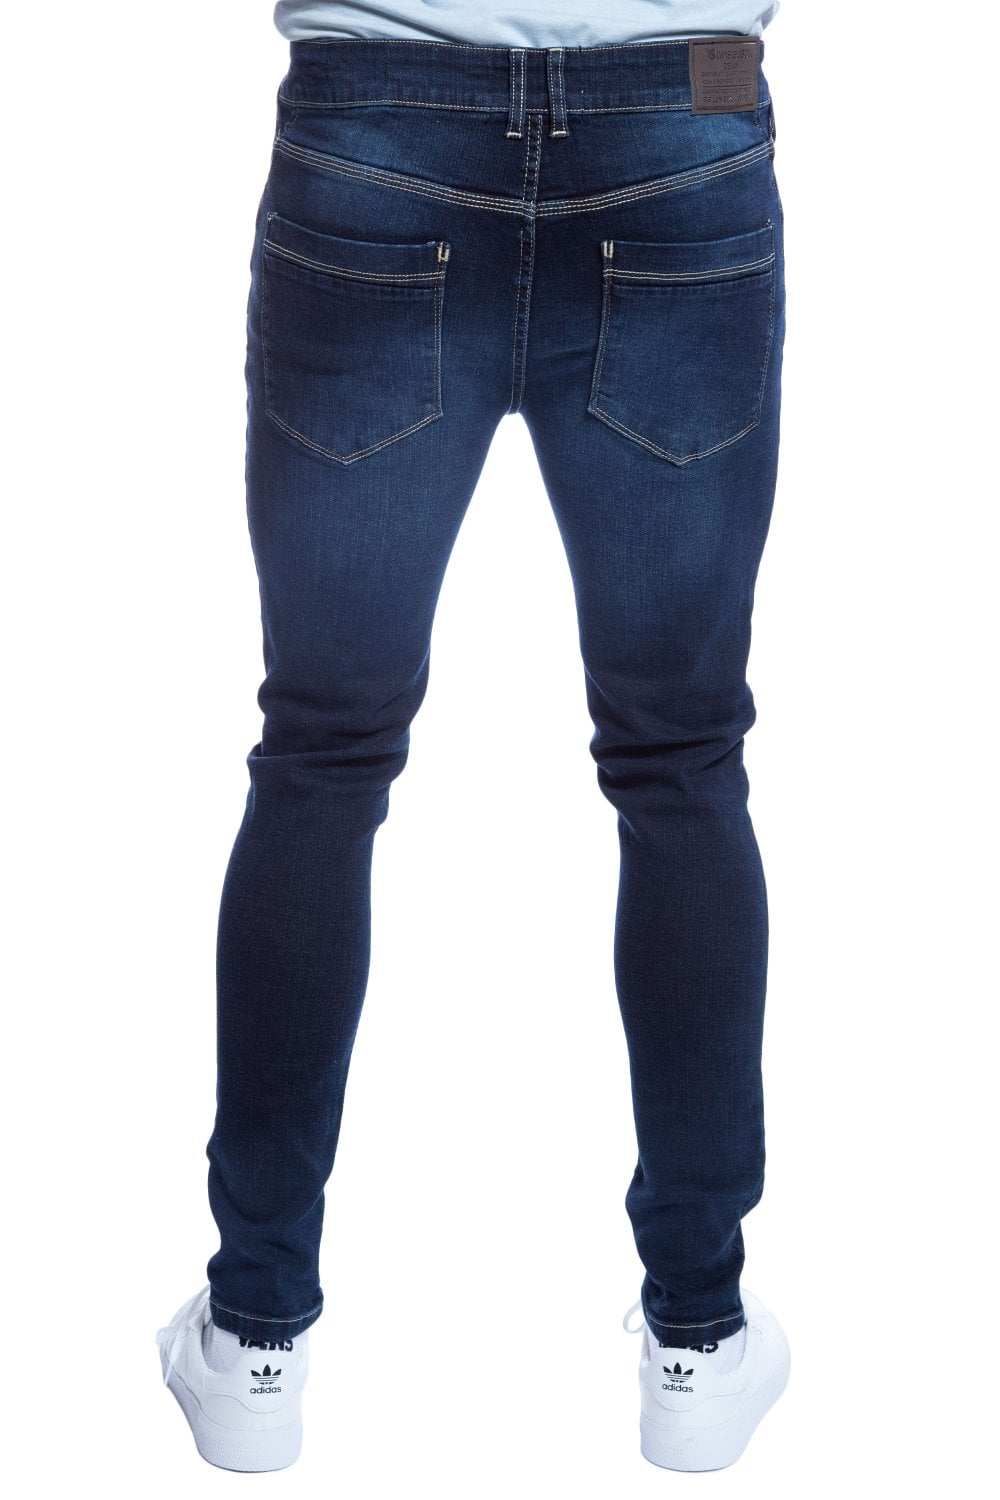 Skinny Fit Jeans - Twisted Soul | Men's Clothing